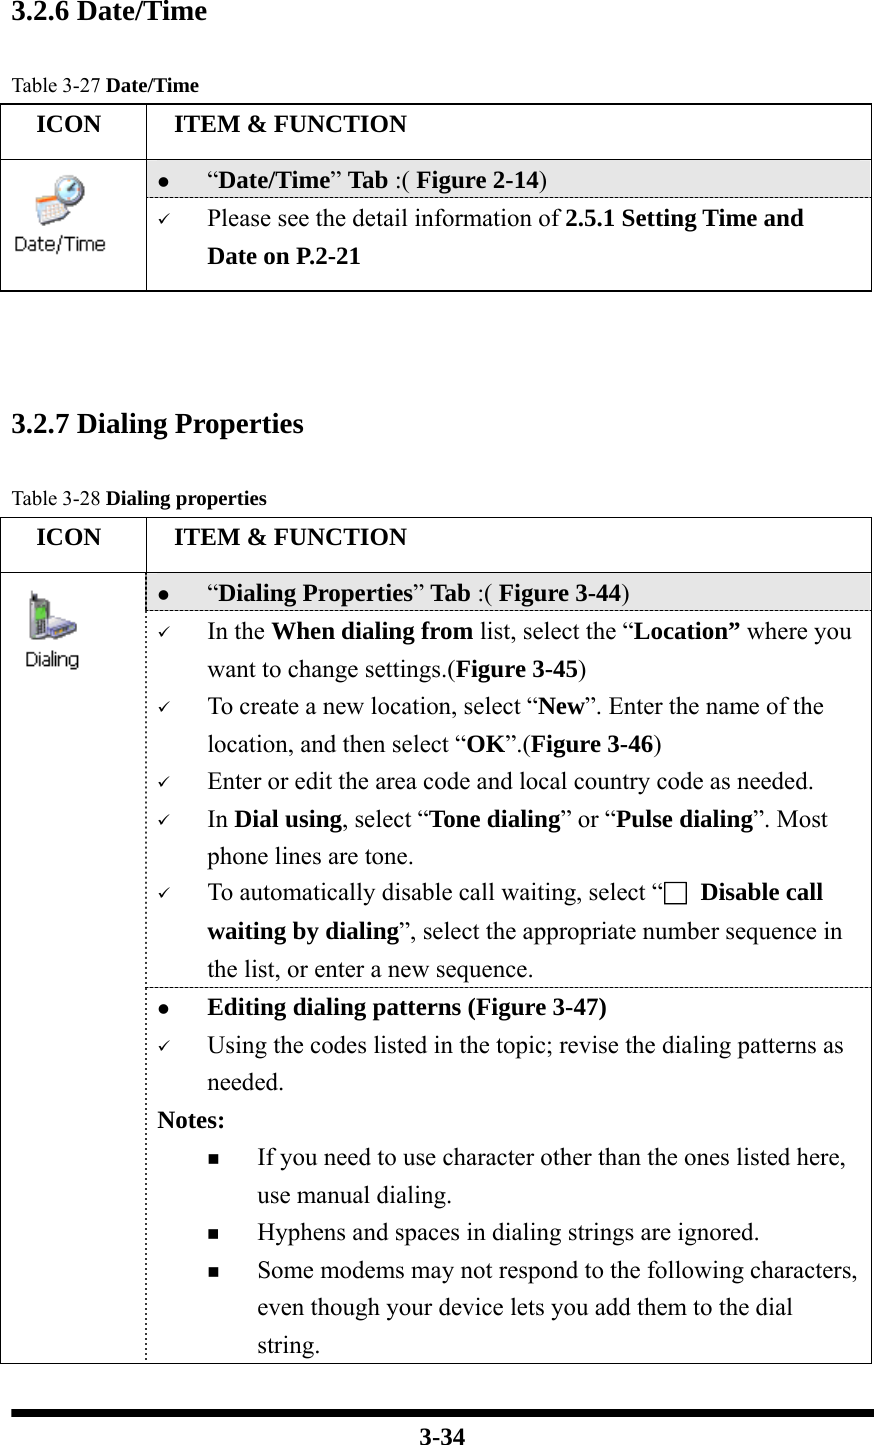  3-34   3.2.6 Date/Time  Table 3-27 Date/Time   ICON   ITEM &amp; FUNCTION z “Date/Time” Tab :( Figure 2-14)    9 Please see the detail information of 2.5.1 Setting Time and Date on P.2-21     3.2.7 Dialing Properties  Table 3-28 Dialing properties   ICON   ITEM &amp; FUNCTION z “Dialing Properties” Tab :( Figure 3-44)   9 In the When dialing from list, select the “Location” where you want to change settings.(Figure 3-45) 9 To create a new location, select “New”. Enter the name of the location, and then select “OK”.(Figure 3-46) 9 Enter or edit the area code and local country code as needed. 9 In Dial using, select “Tone dialing” or “Pulse dialing”. Most phone lines are tone. 9 To automatically disable call waiting, select “□ Disable call waiting by dialing”, select the appropriate number sequence in the list, or enter a new sequence.   z Editing dialing patterns (Figure 3-47) 9 Using the codes listed in the topic; revise the dialing patterns as needed. Notes:  If you need to use character other than the ones listed here, use manual dialing.  Hyphens and spaces in dialing strings are ignored.  Some modems may not respond to the following characters, even though your device lets you add them to the dial string. 